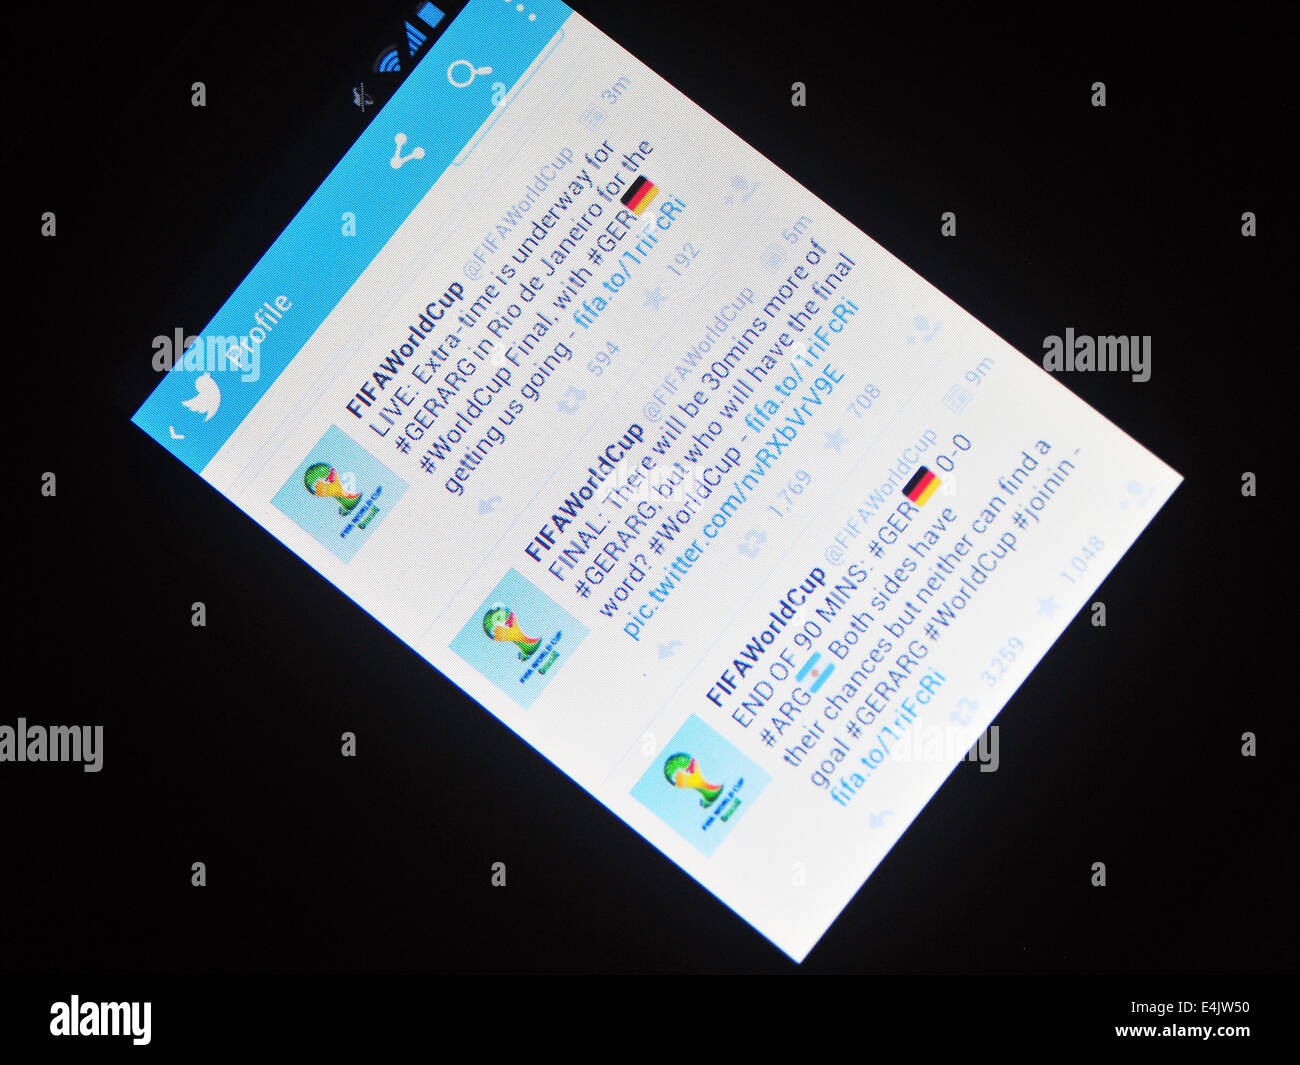 Tweets during the 2014 FIFA World Cup Final between Argentina and Germany. Stock Photo